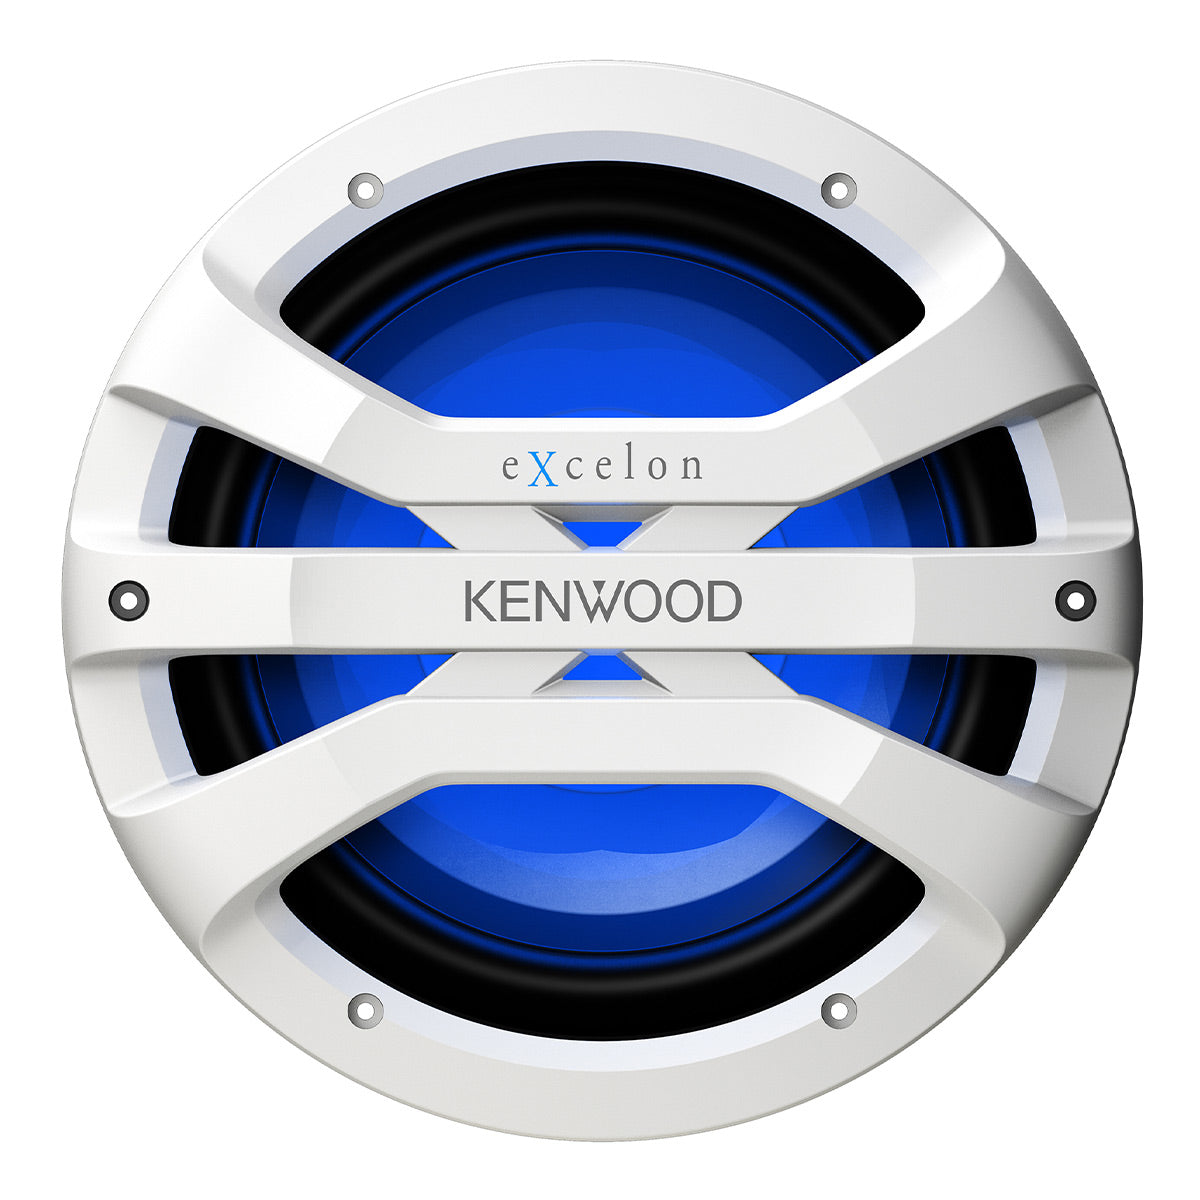 Kenwood XM1041BL eXcelon Motorsports 10" All-Weather Outdoor Subwoofer with Adjustable Lighting - Each (White)